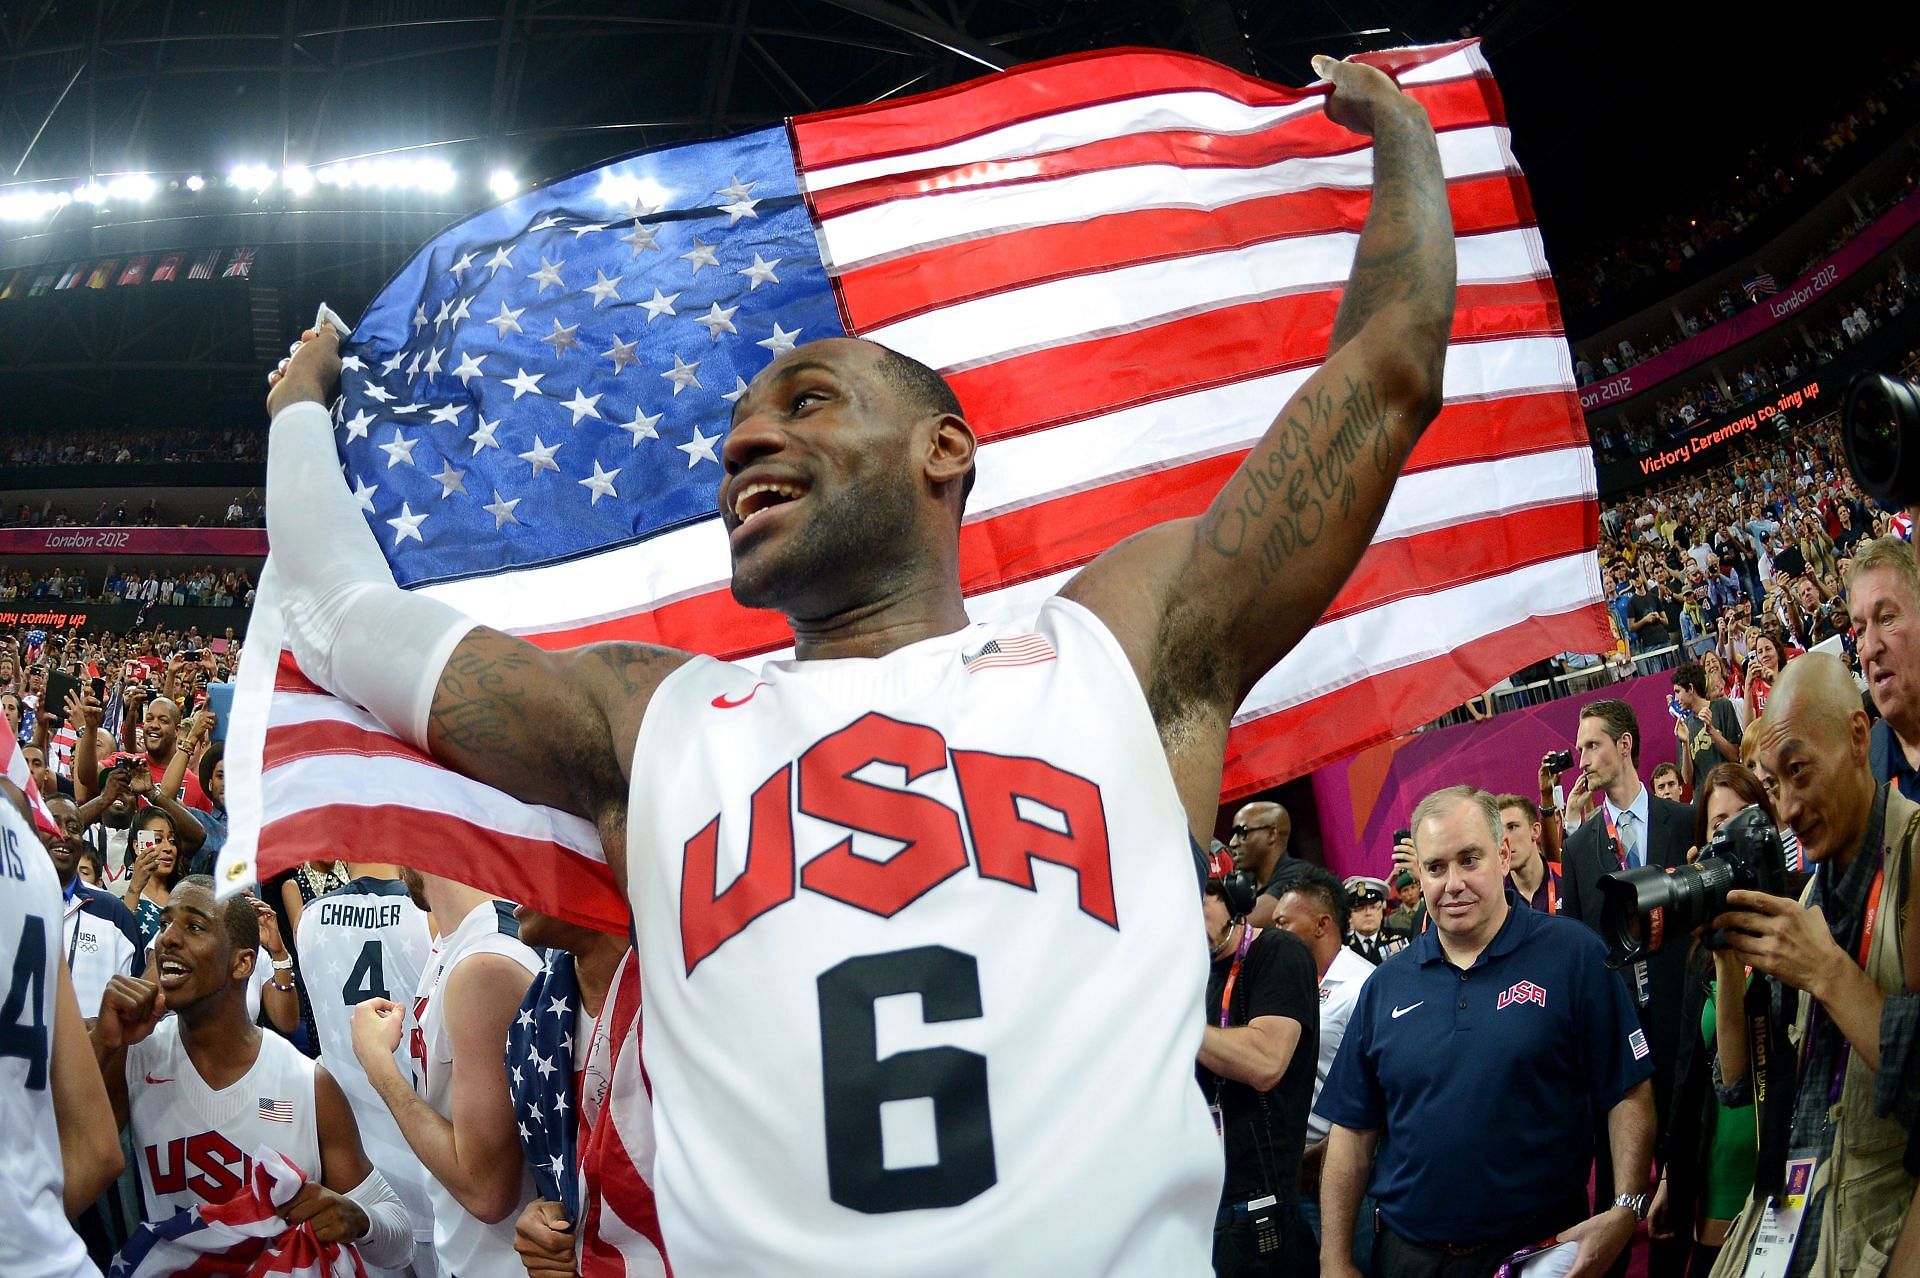 Former NBA champion says the 2012 USA Olympic team is the greatest team of all time